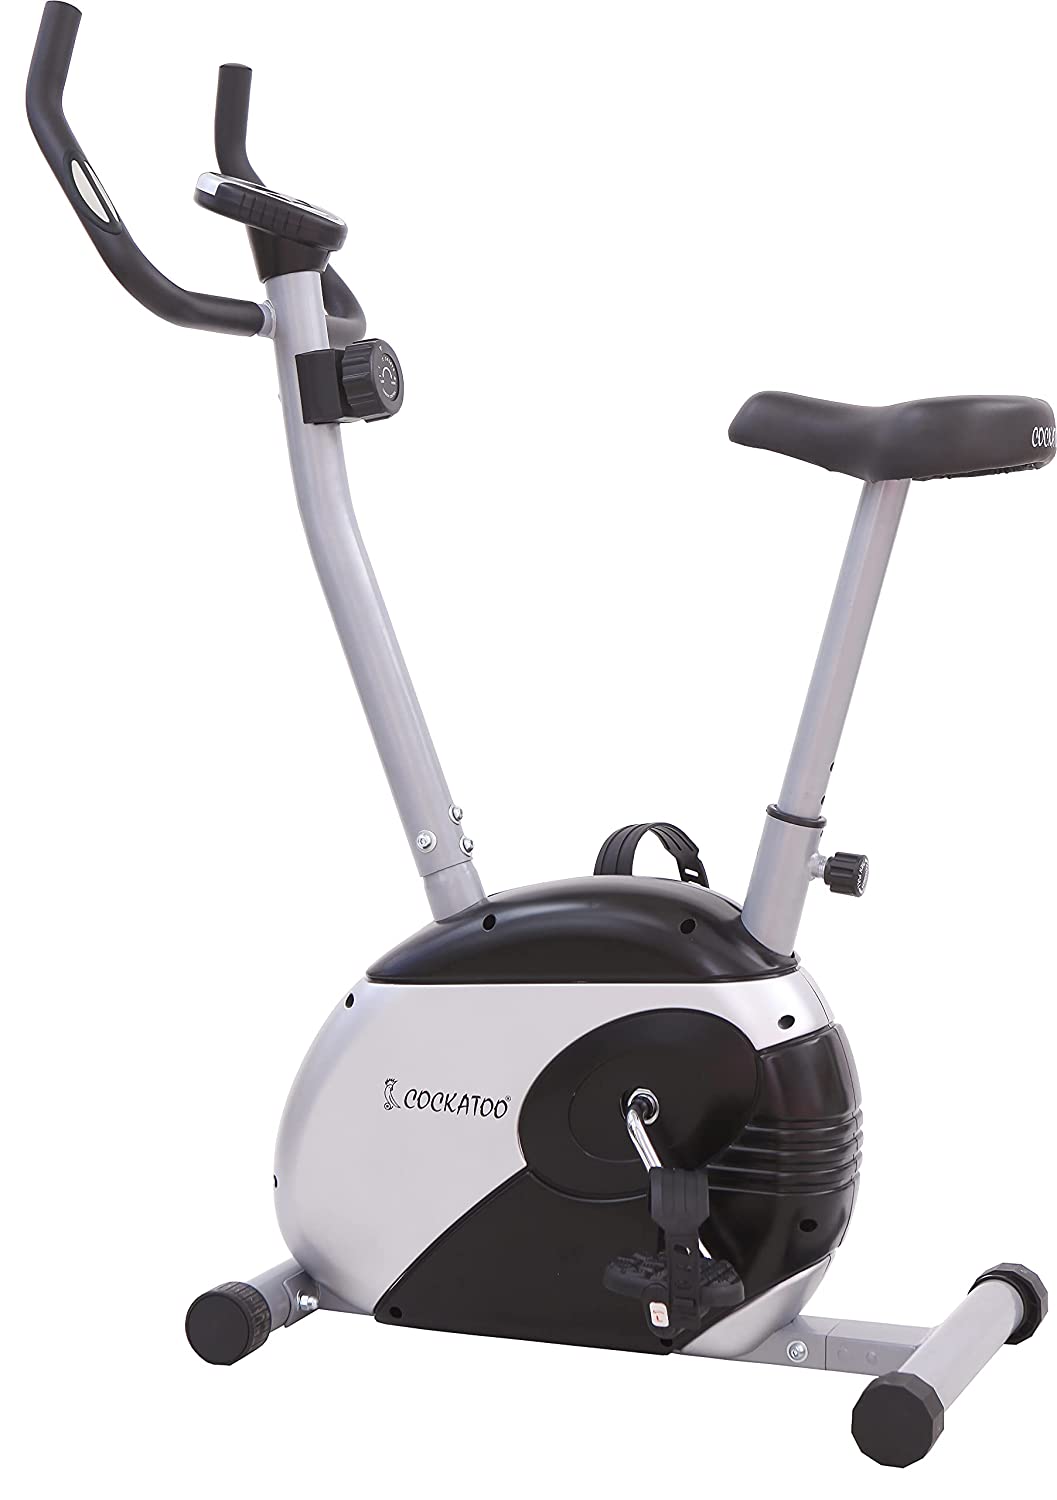 Best Cockatoo Exercise Bike For Home